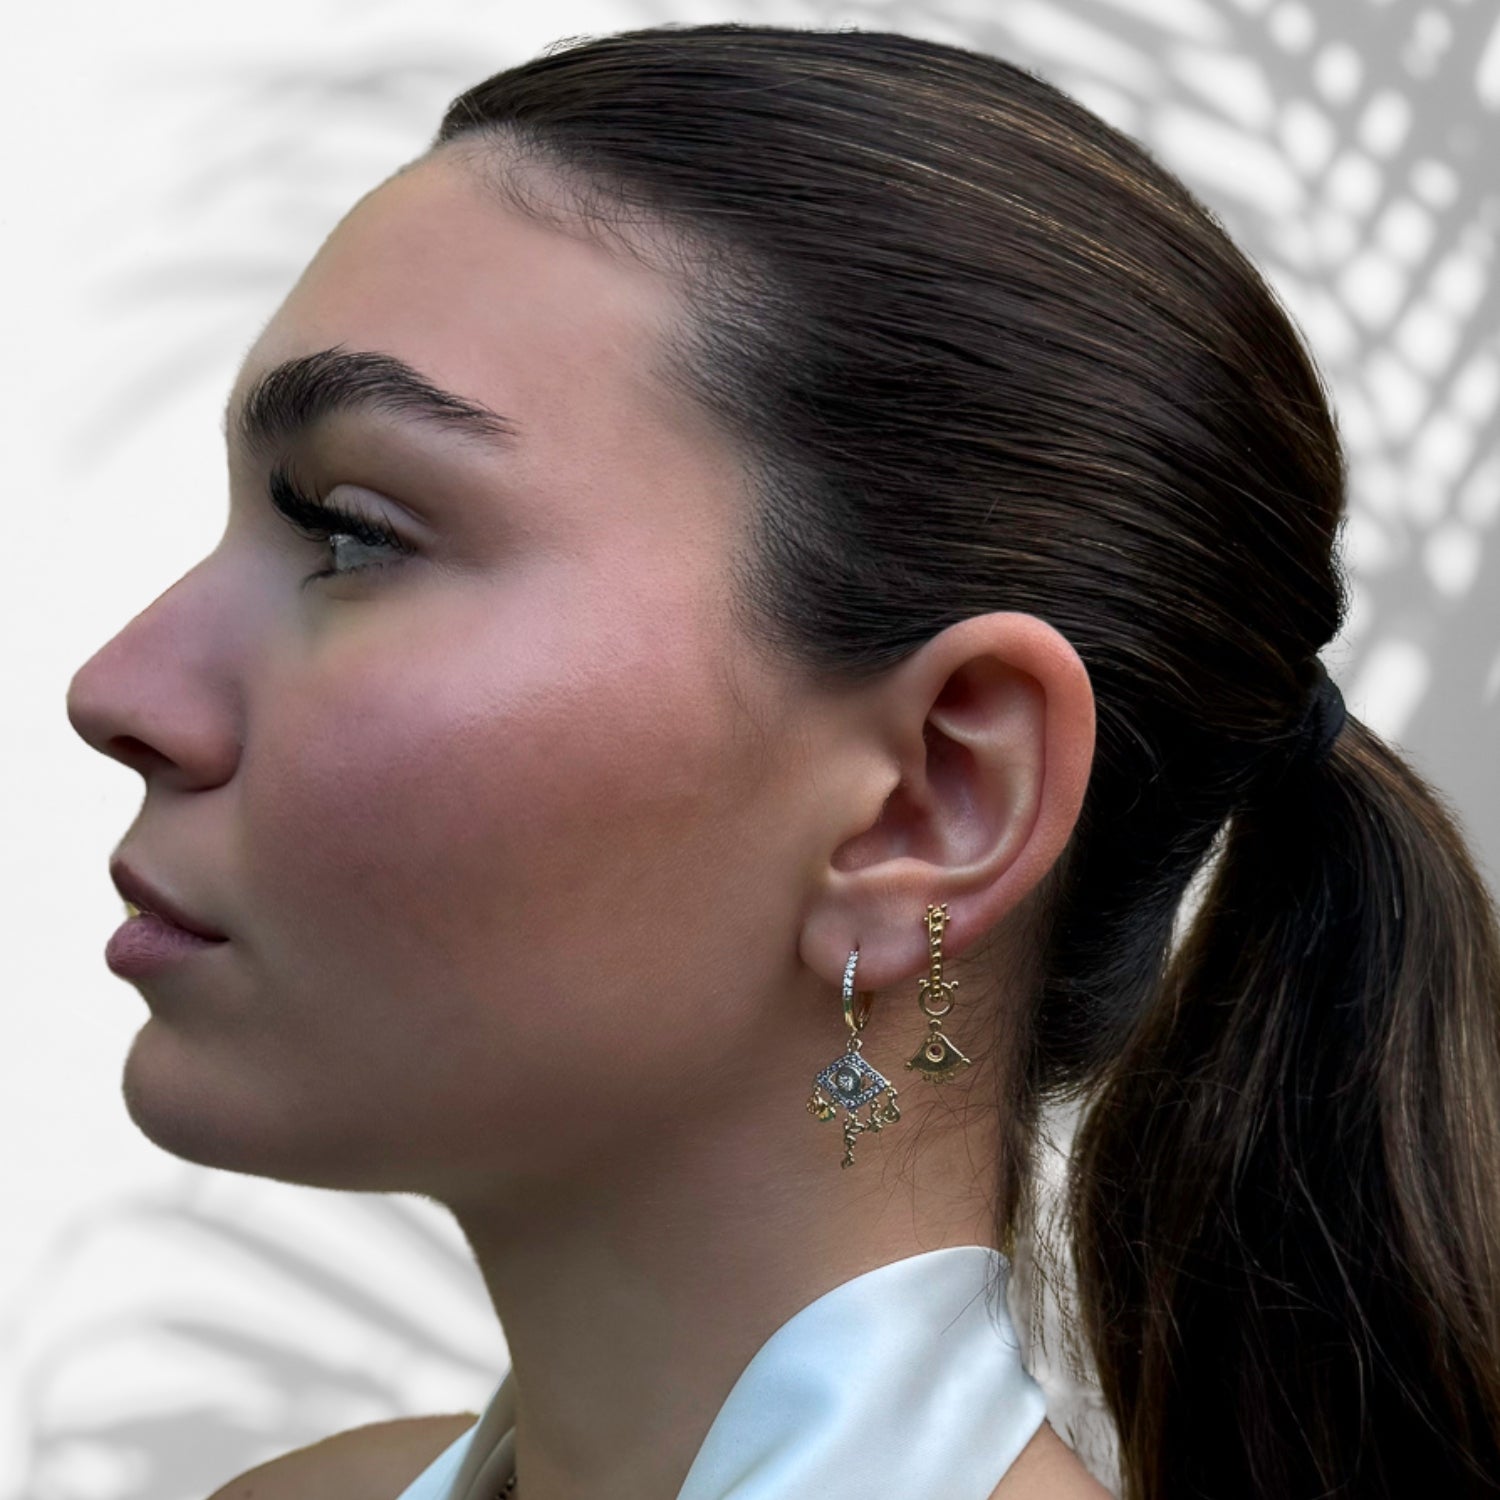 Model Radiating Positive Vibes in Peace & Love Gold Earrings